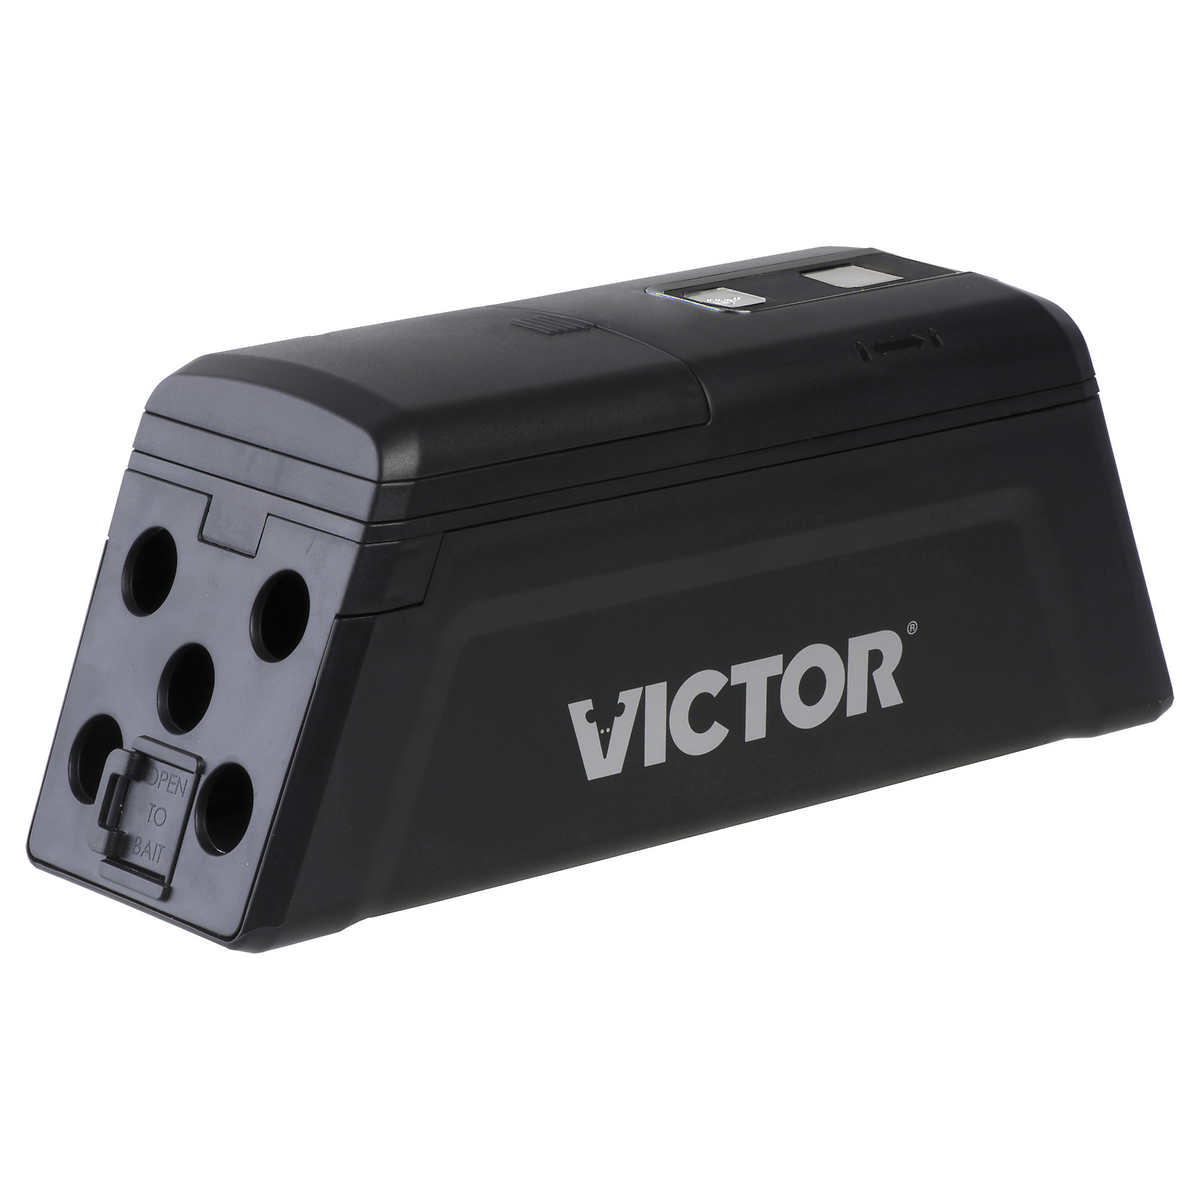 Electronic Mouse Large Rat Trap Victor Pest Control Electric Zapper Rodent  US Plug Adapter/Battery Version